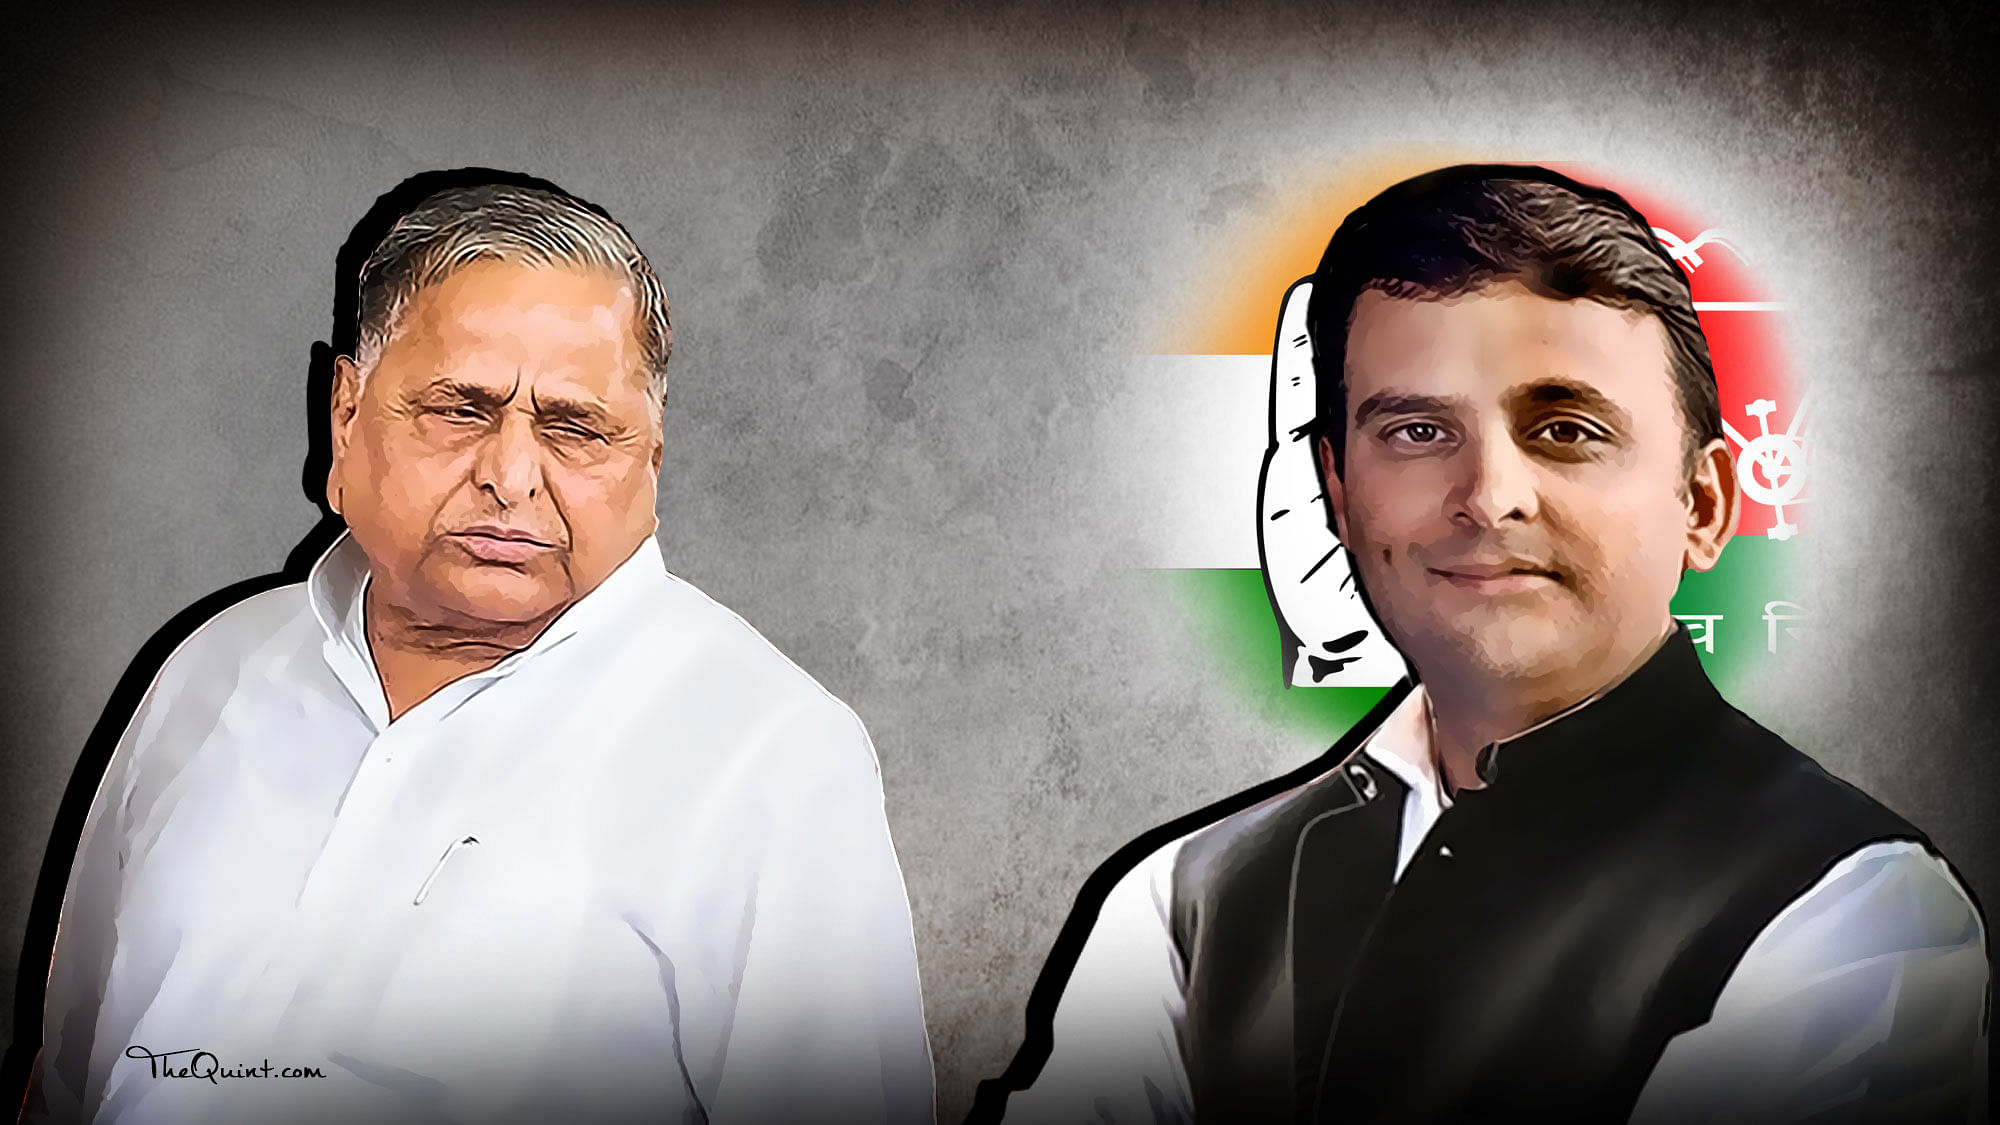 Mulayam Yadav said though the Congress left no stone unturned to “ruin” his life, Akhilesh Yadav forged an alliance with them. (Photo: The Quint)